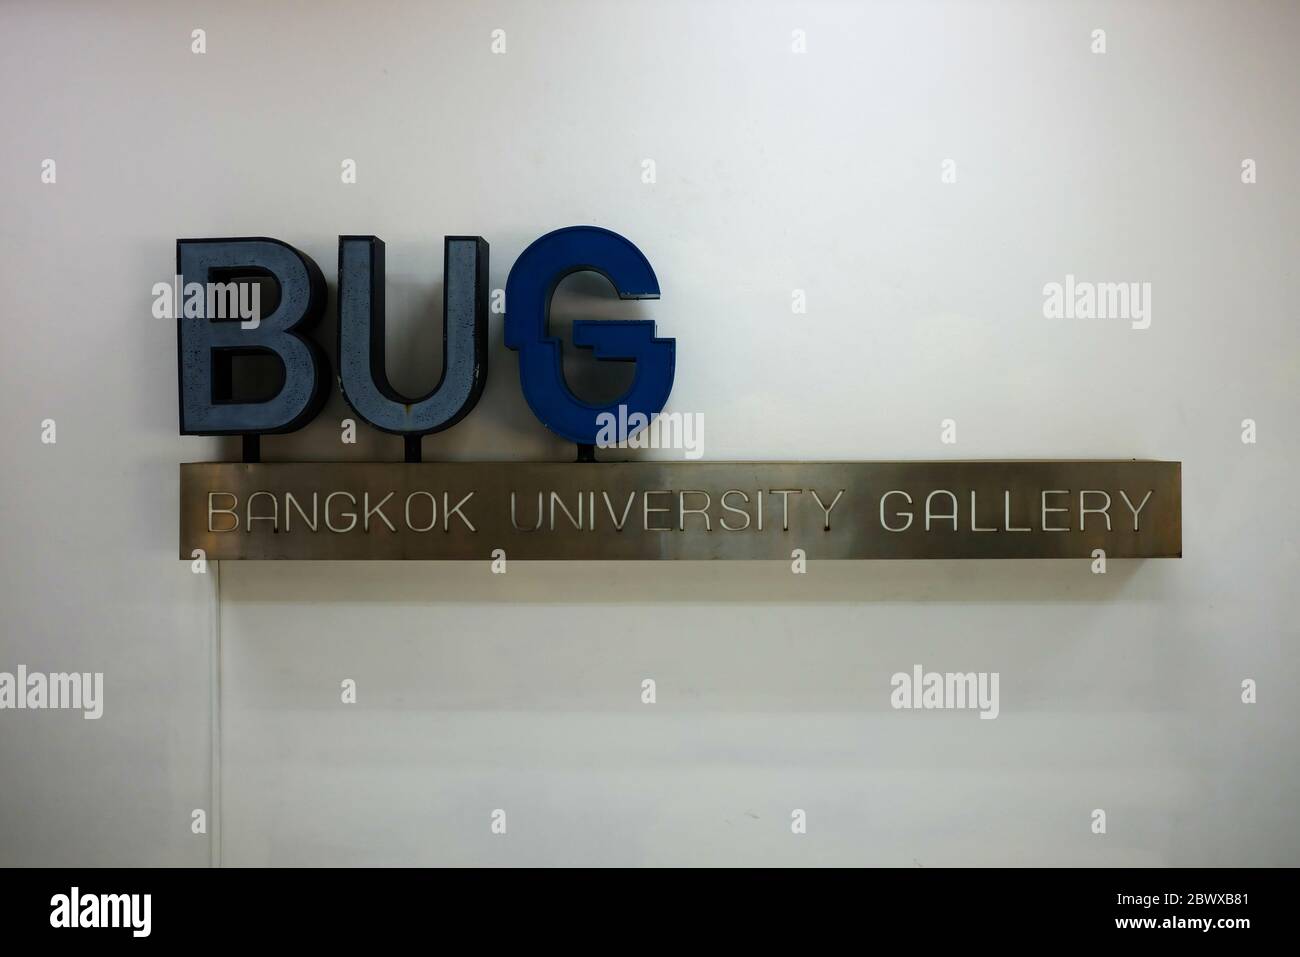 BANGKOK, THAILAND - FEBRUARY 25, 2020: BUG gallery sign on white concrete wall. BUG is the art museum in Bangkok university where is a famous private Stock Photo